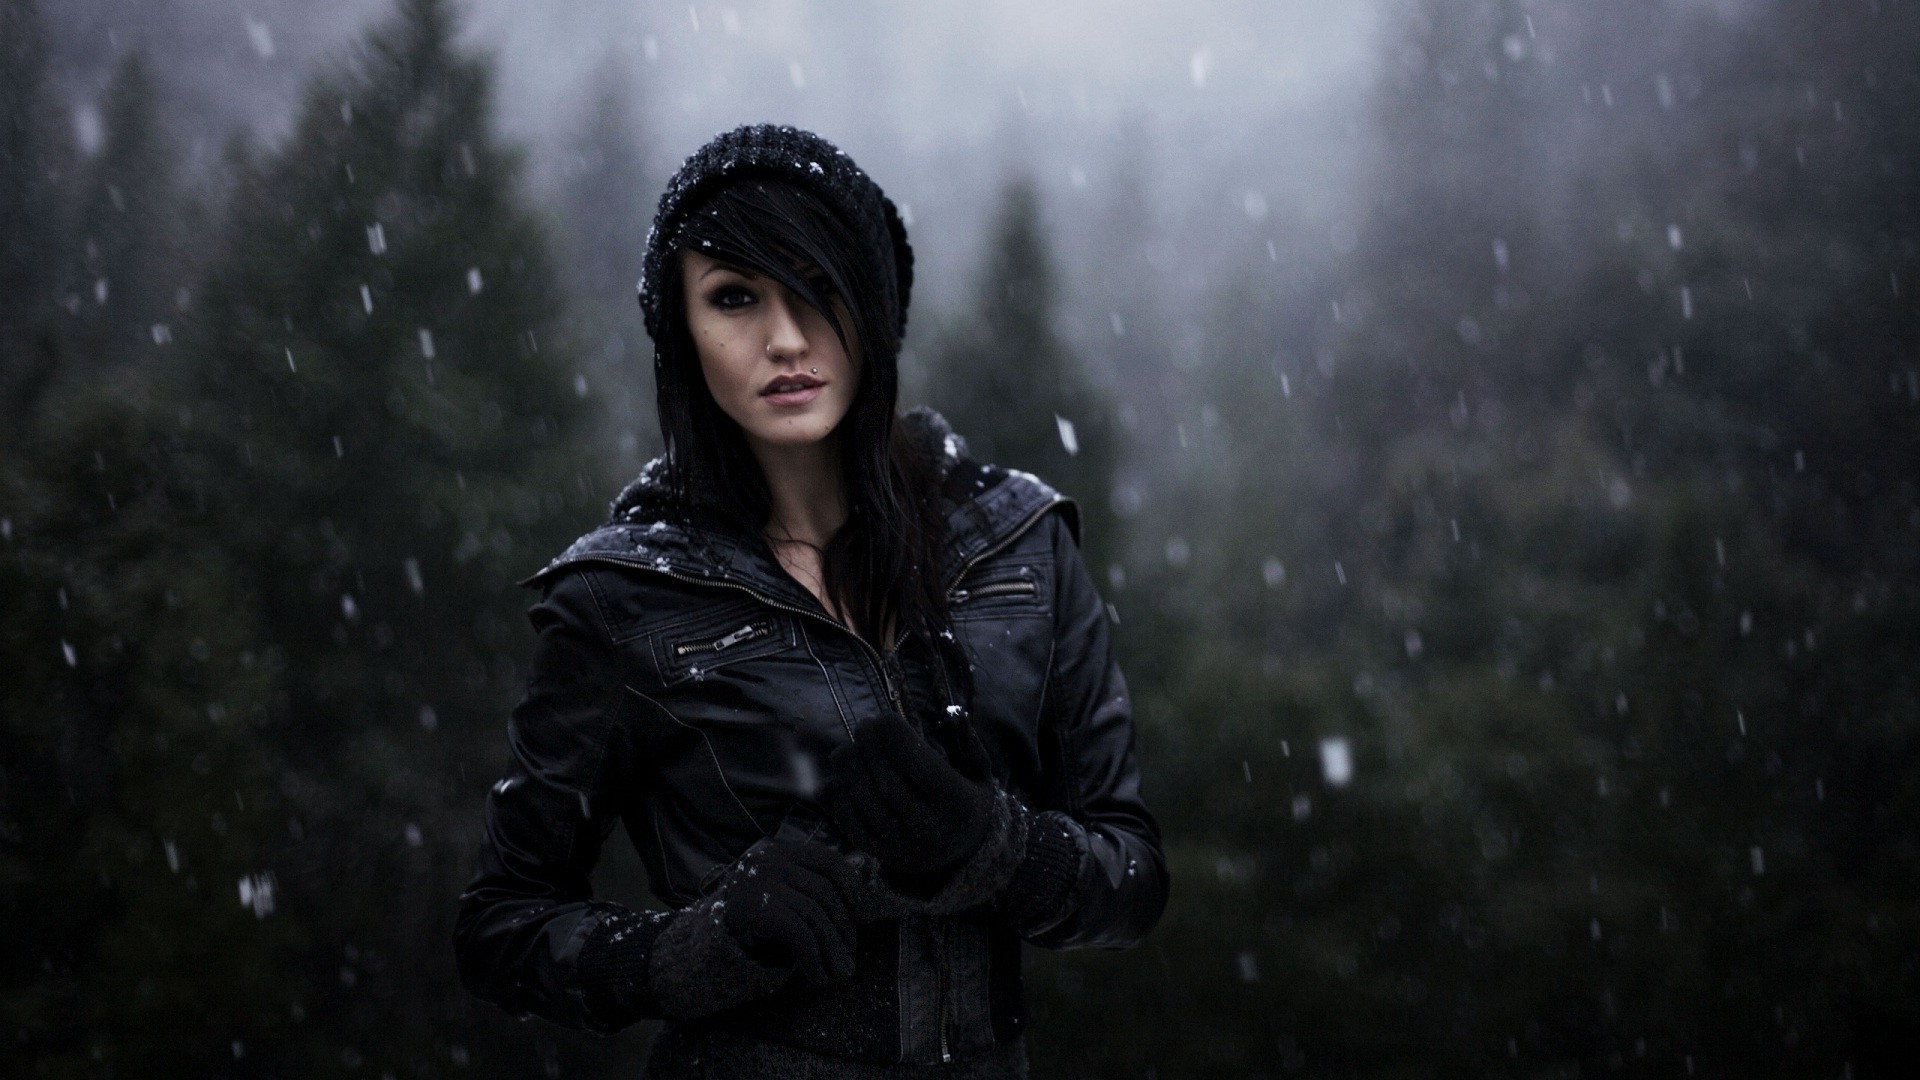 winter, Women, Piercing, Emo, Black Hair, Nature, Depth Of Field, Snow, Forest, Face, Leather Jackets, Gloves Wallpaper